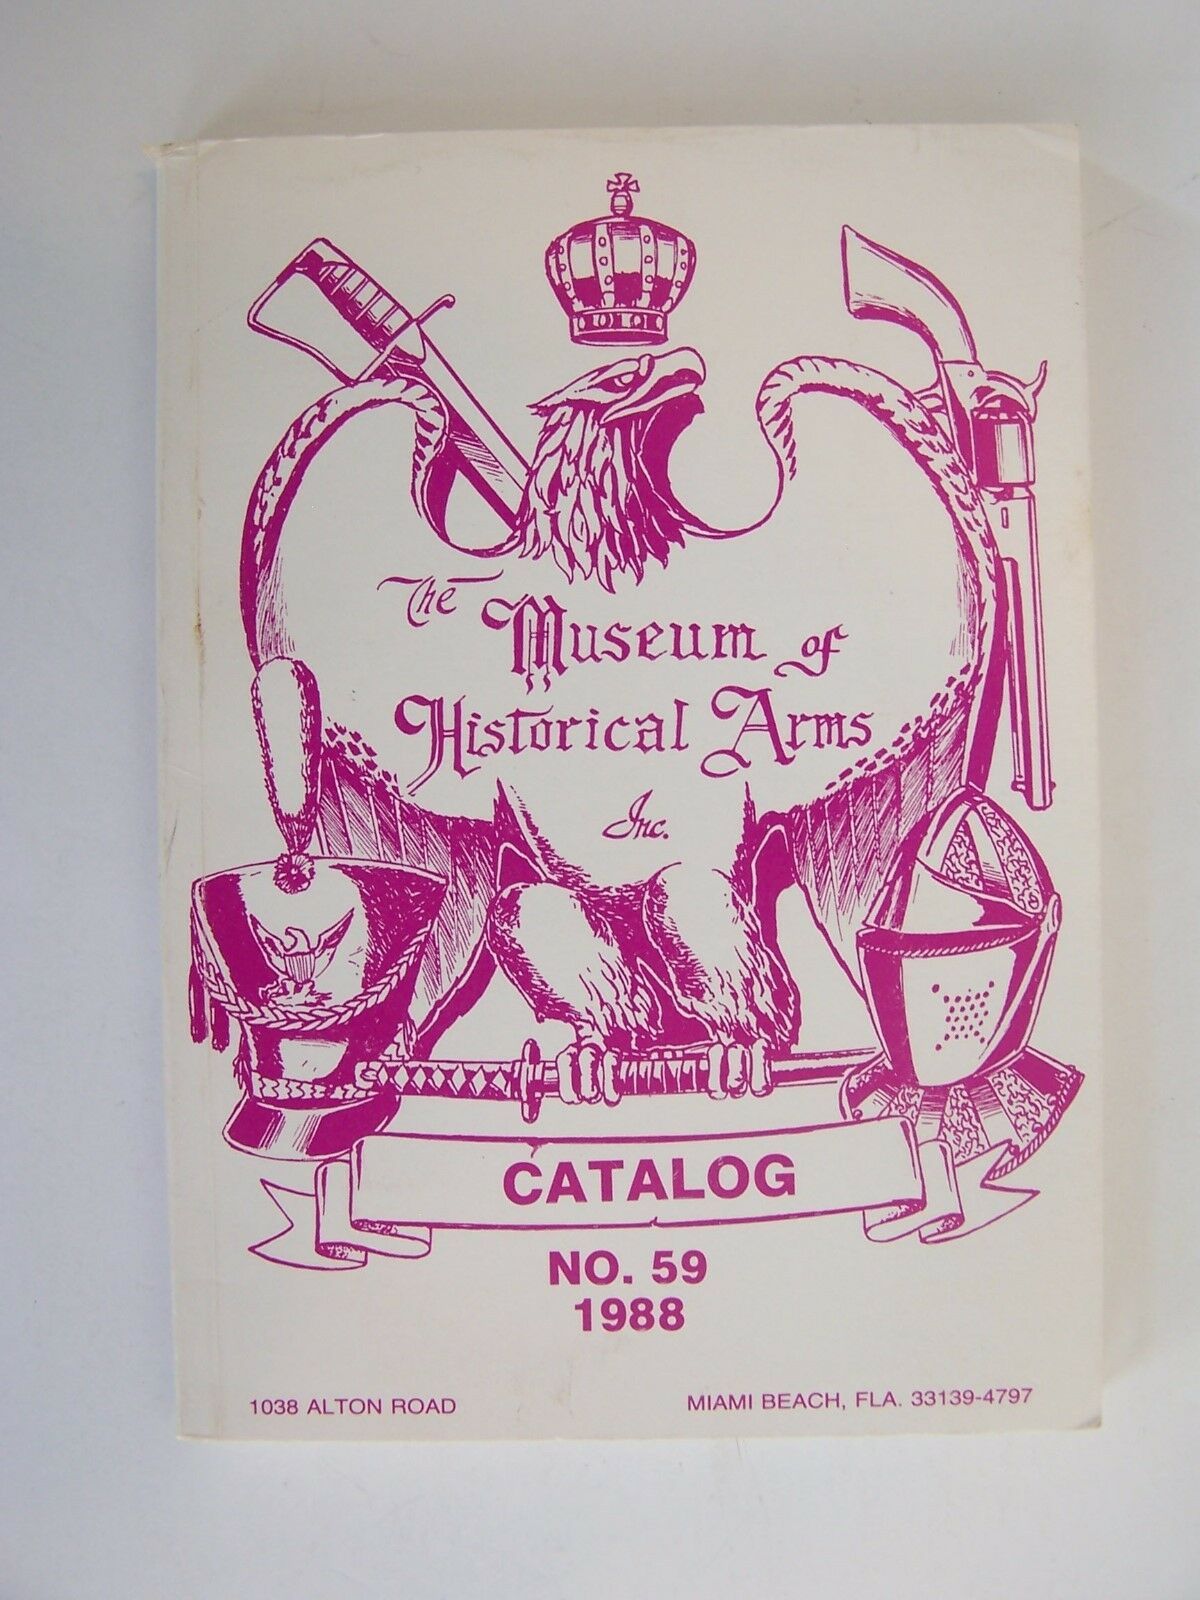 Primary image for The Museum of Historical Arms Inc Catalog 59, 1988